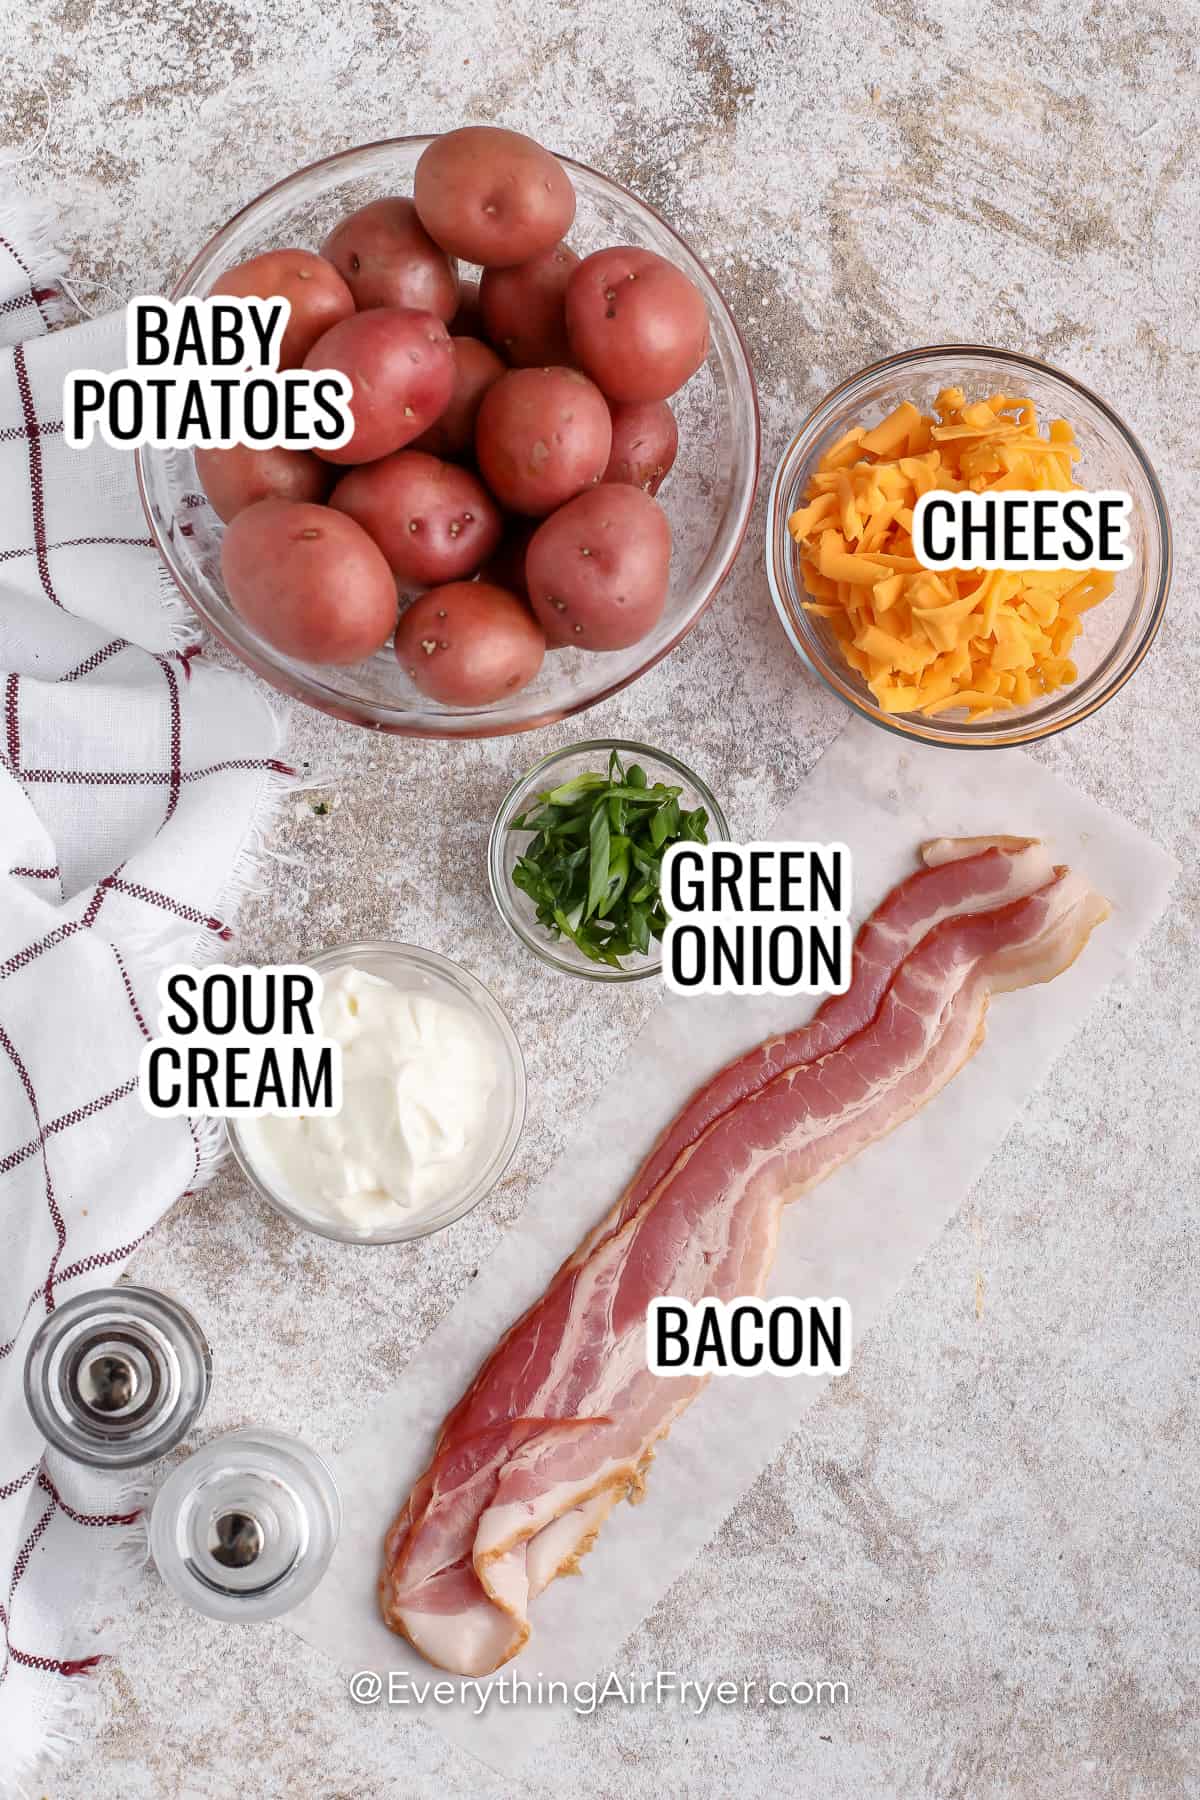 ingredients assembled to make loaded air fryer smashed potatoes, including bacon, baby potatoes, cheese, sour cream, and green onions